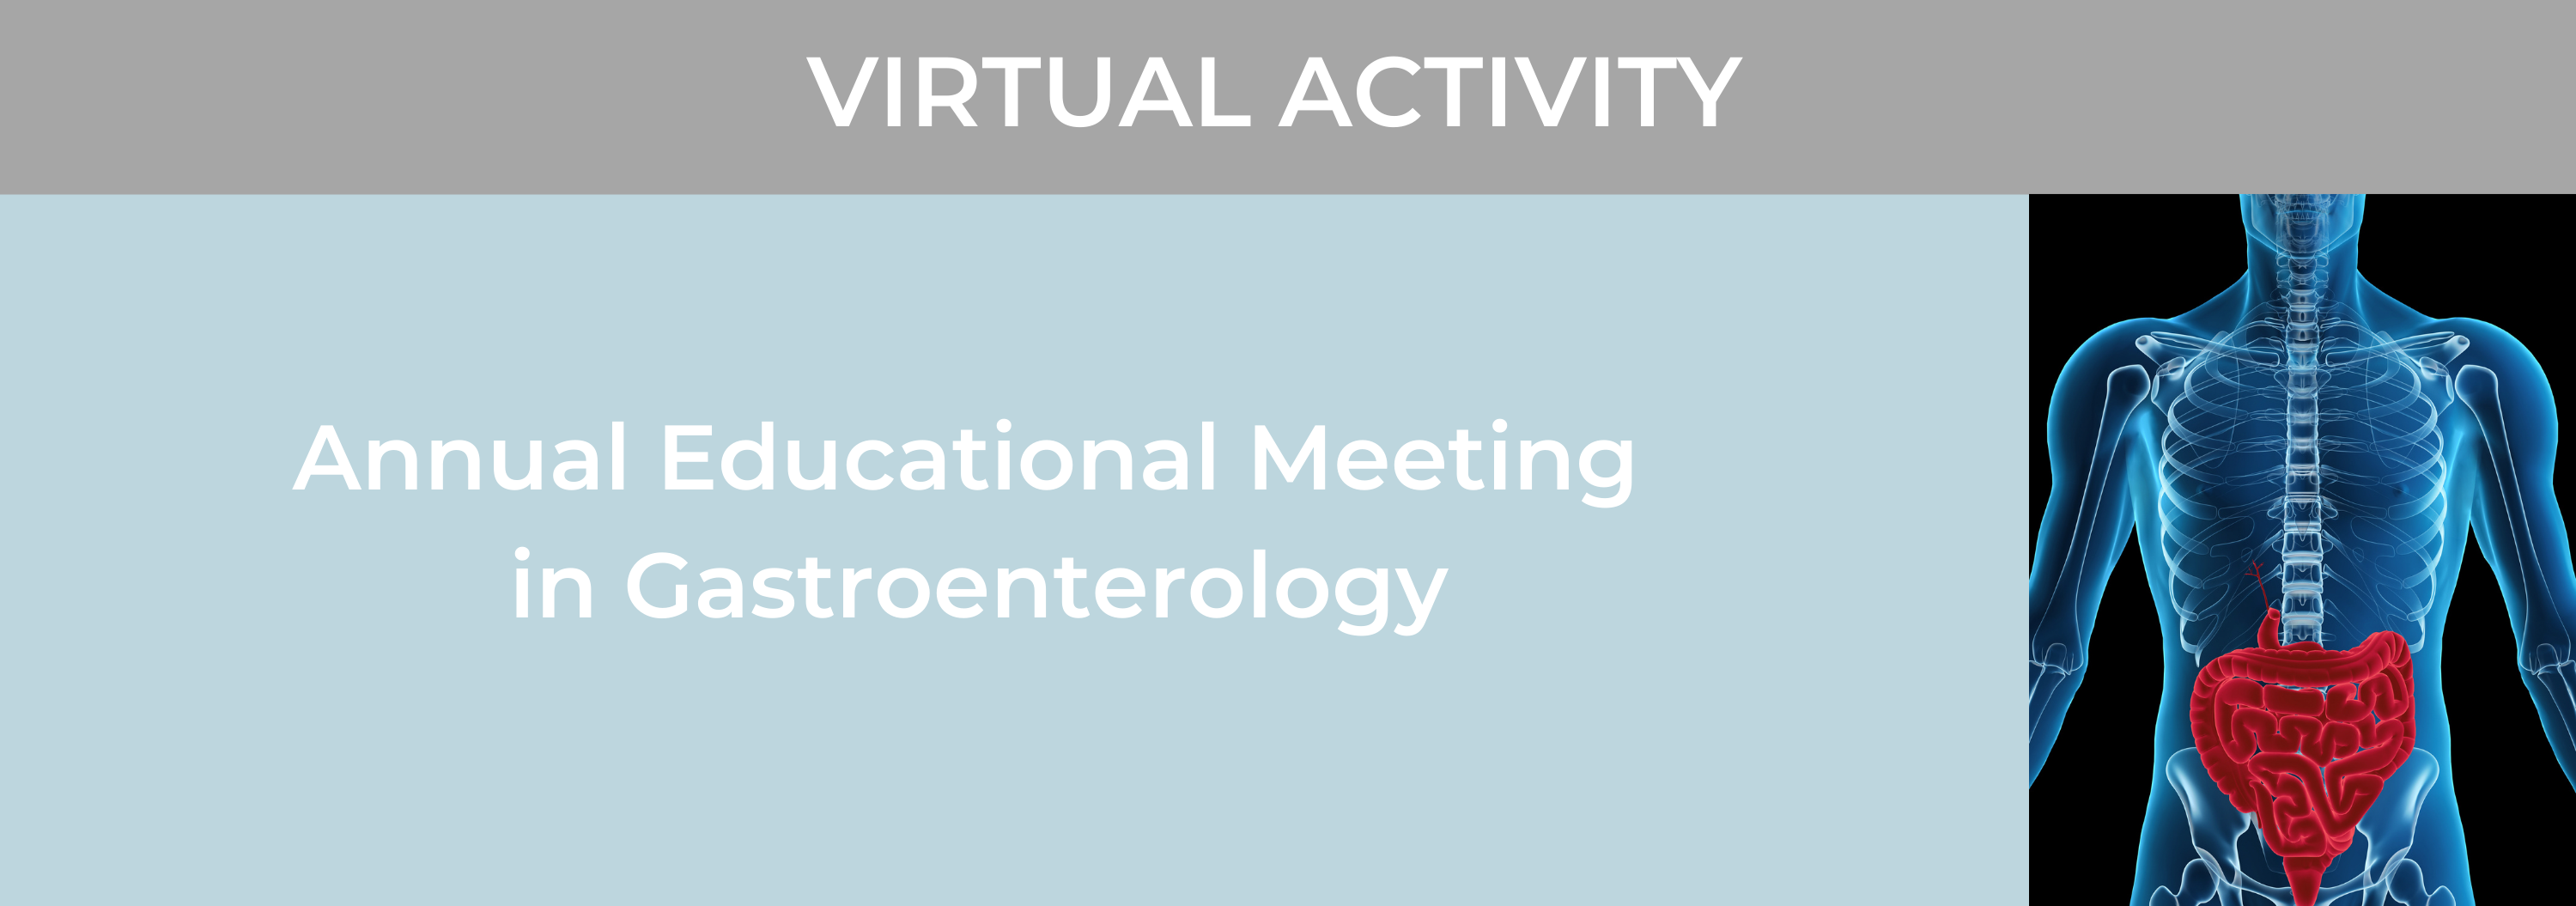 21st Annual Educational Meeting in Gastroenterology Banner